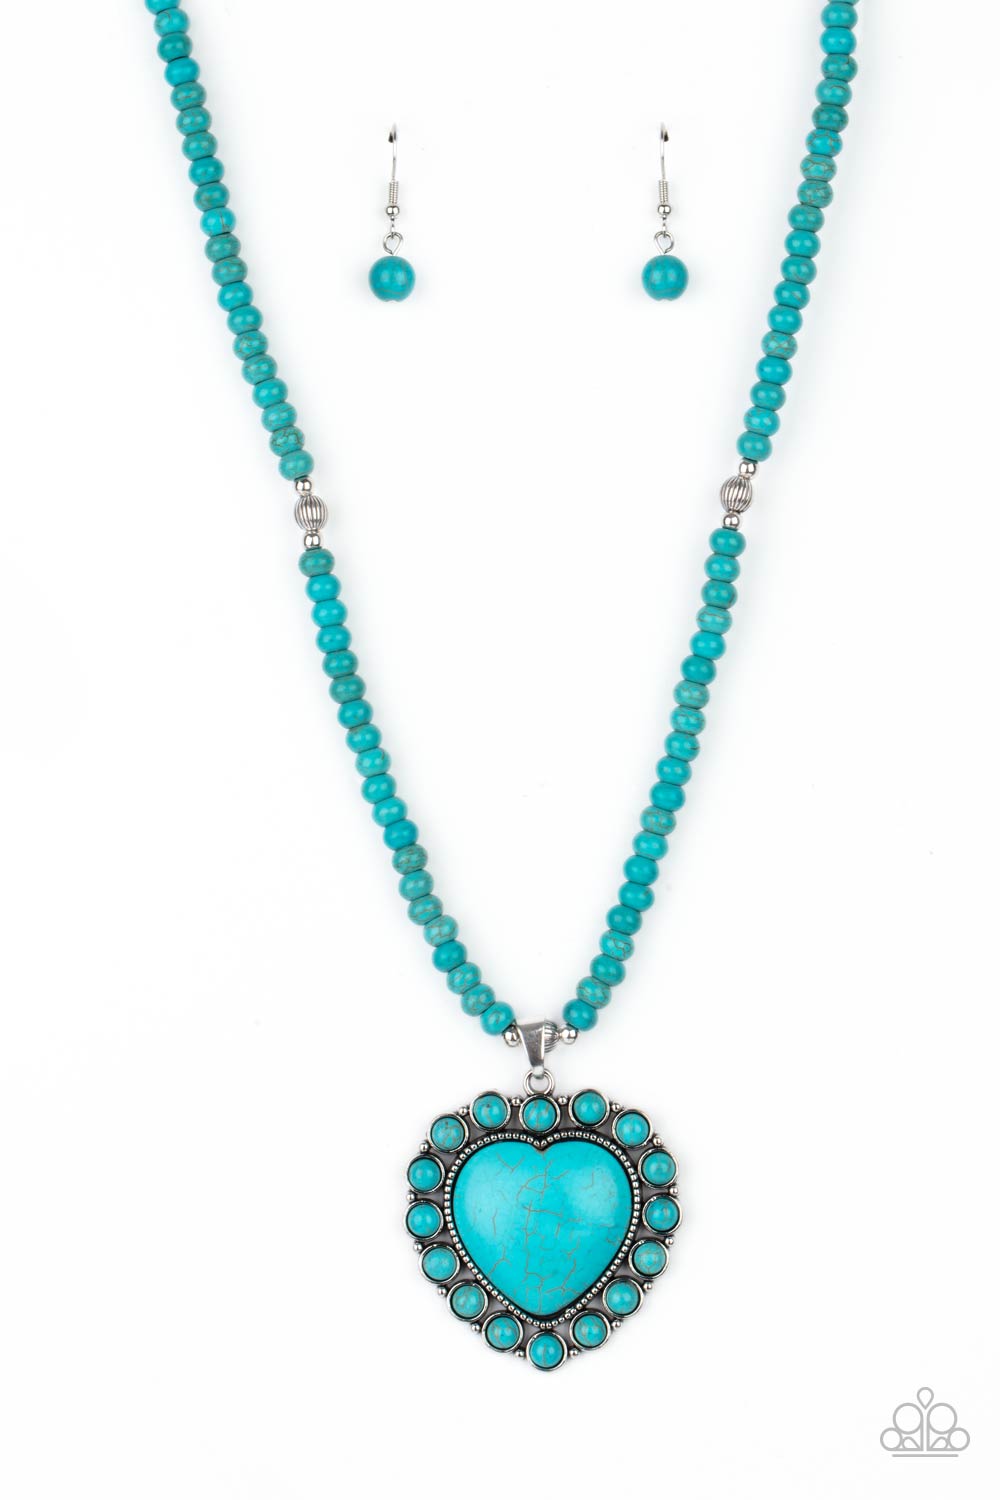 A Heart Of Stone Turquoise Blue Stone Heart Necklace - Paparazzi Accessories LOTP Exclusive April 2021- lightbox - CarasShop.com - $5 Jewelry by Cara Jewels